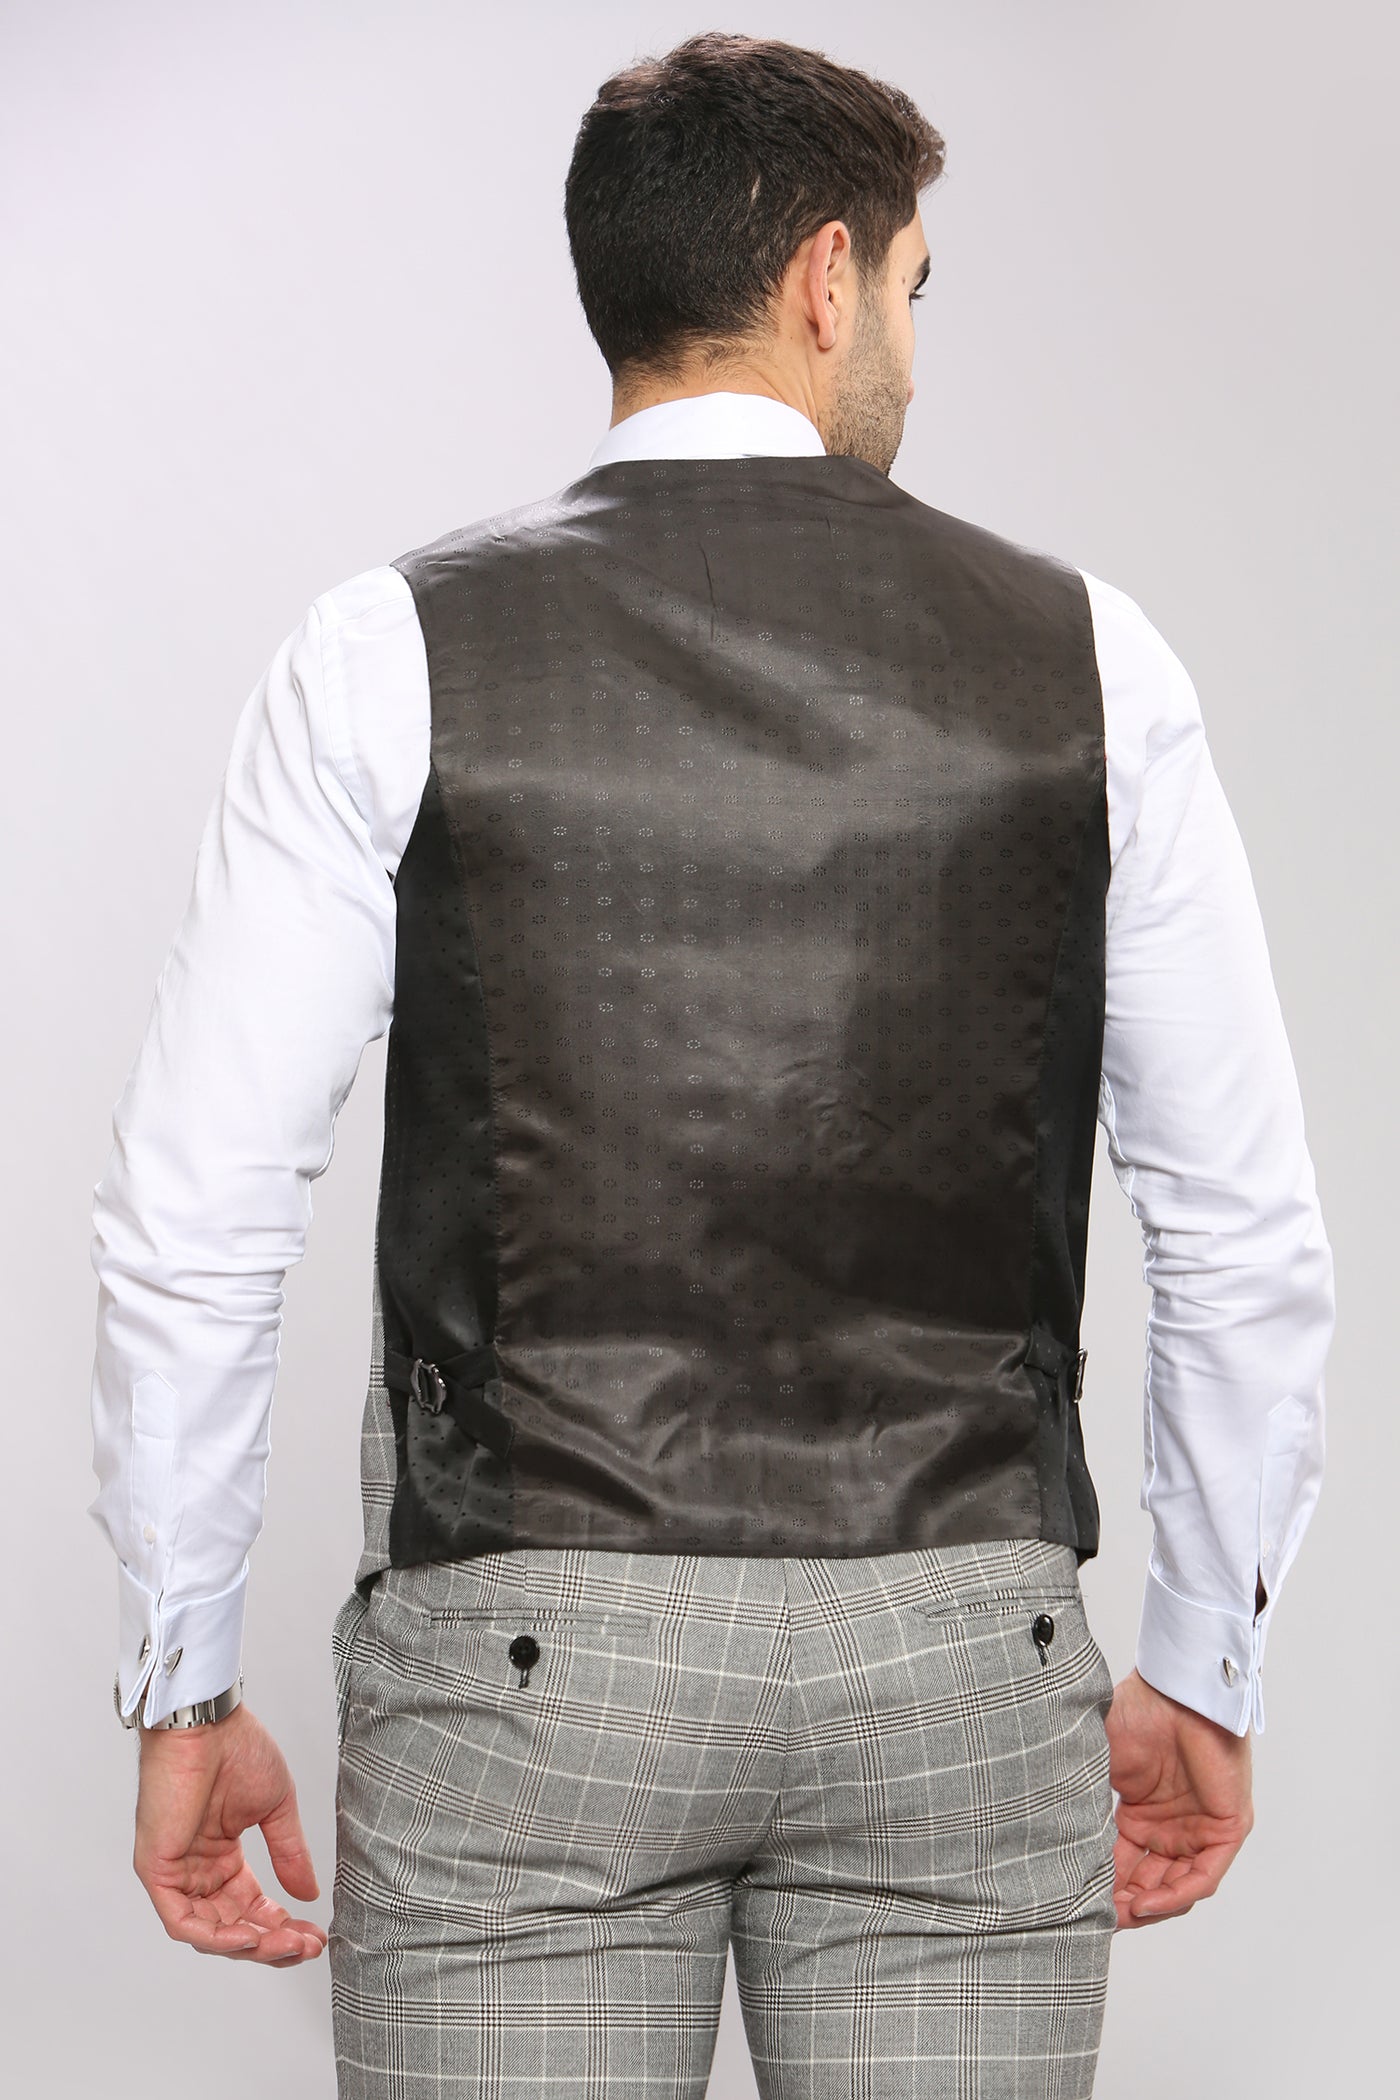 ROSS - Grey Check Three Piece Suit